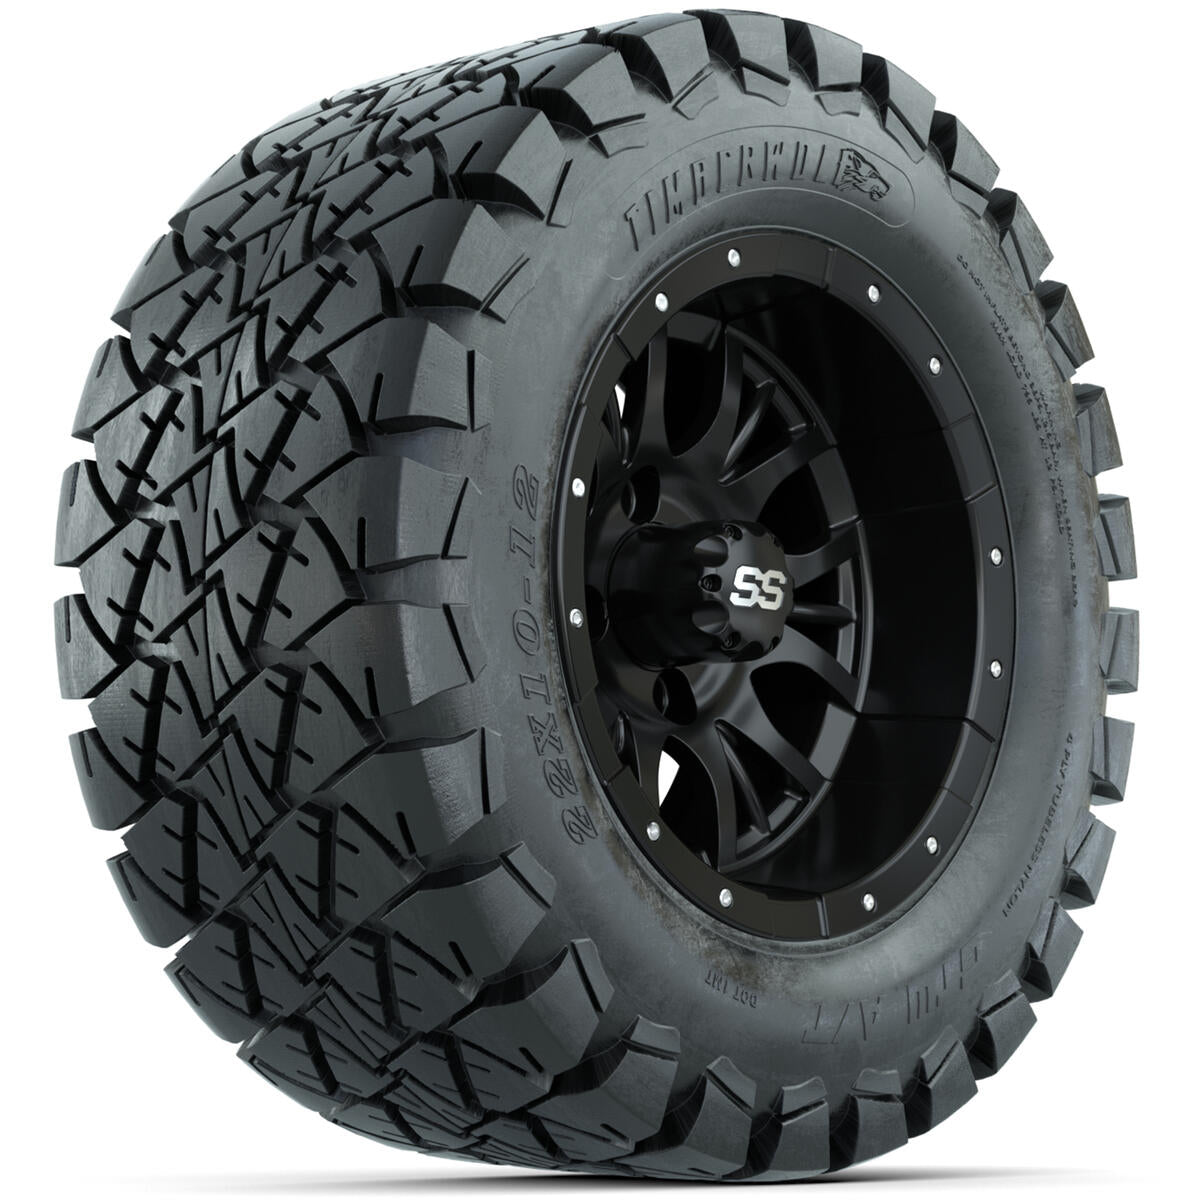 Set of 4 12"in GTW Diesel Wheels with 22x10-12"GTW Timberwolf All-Terrain Tires A19-652